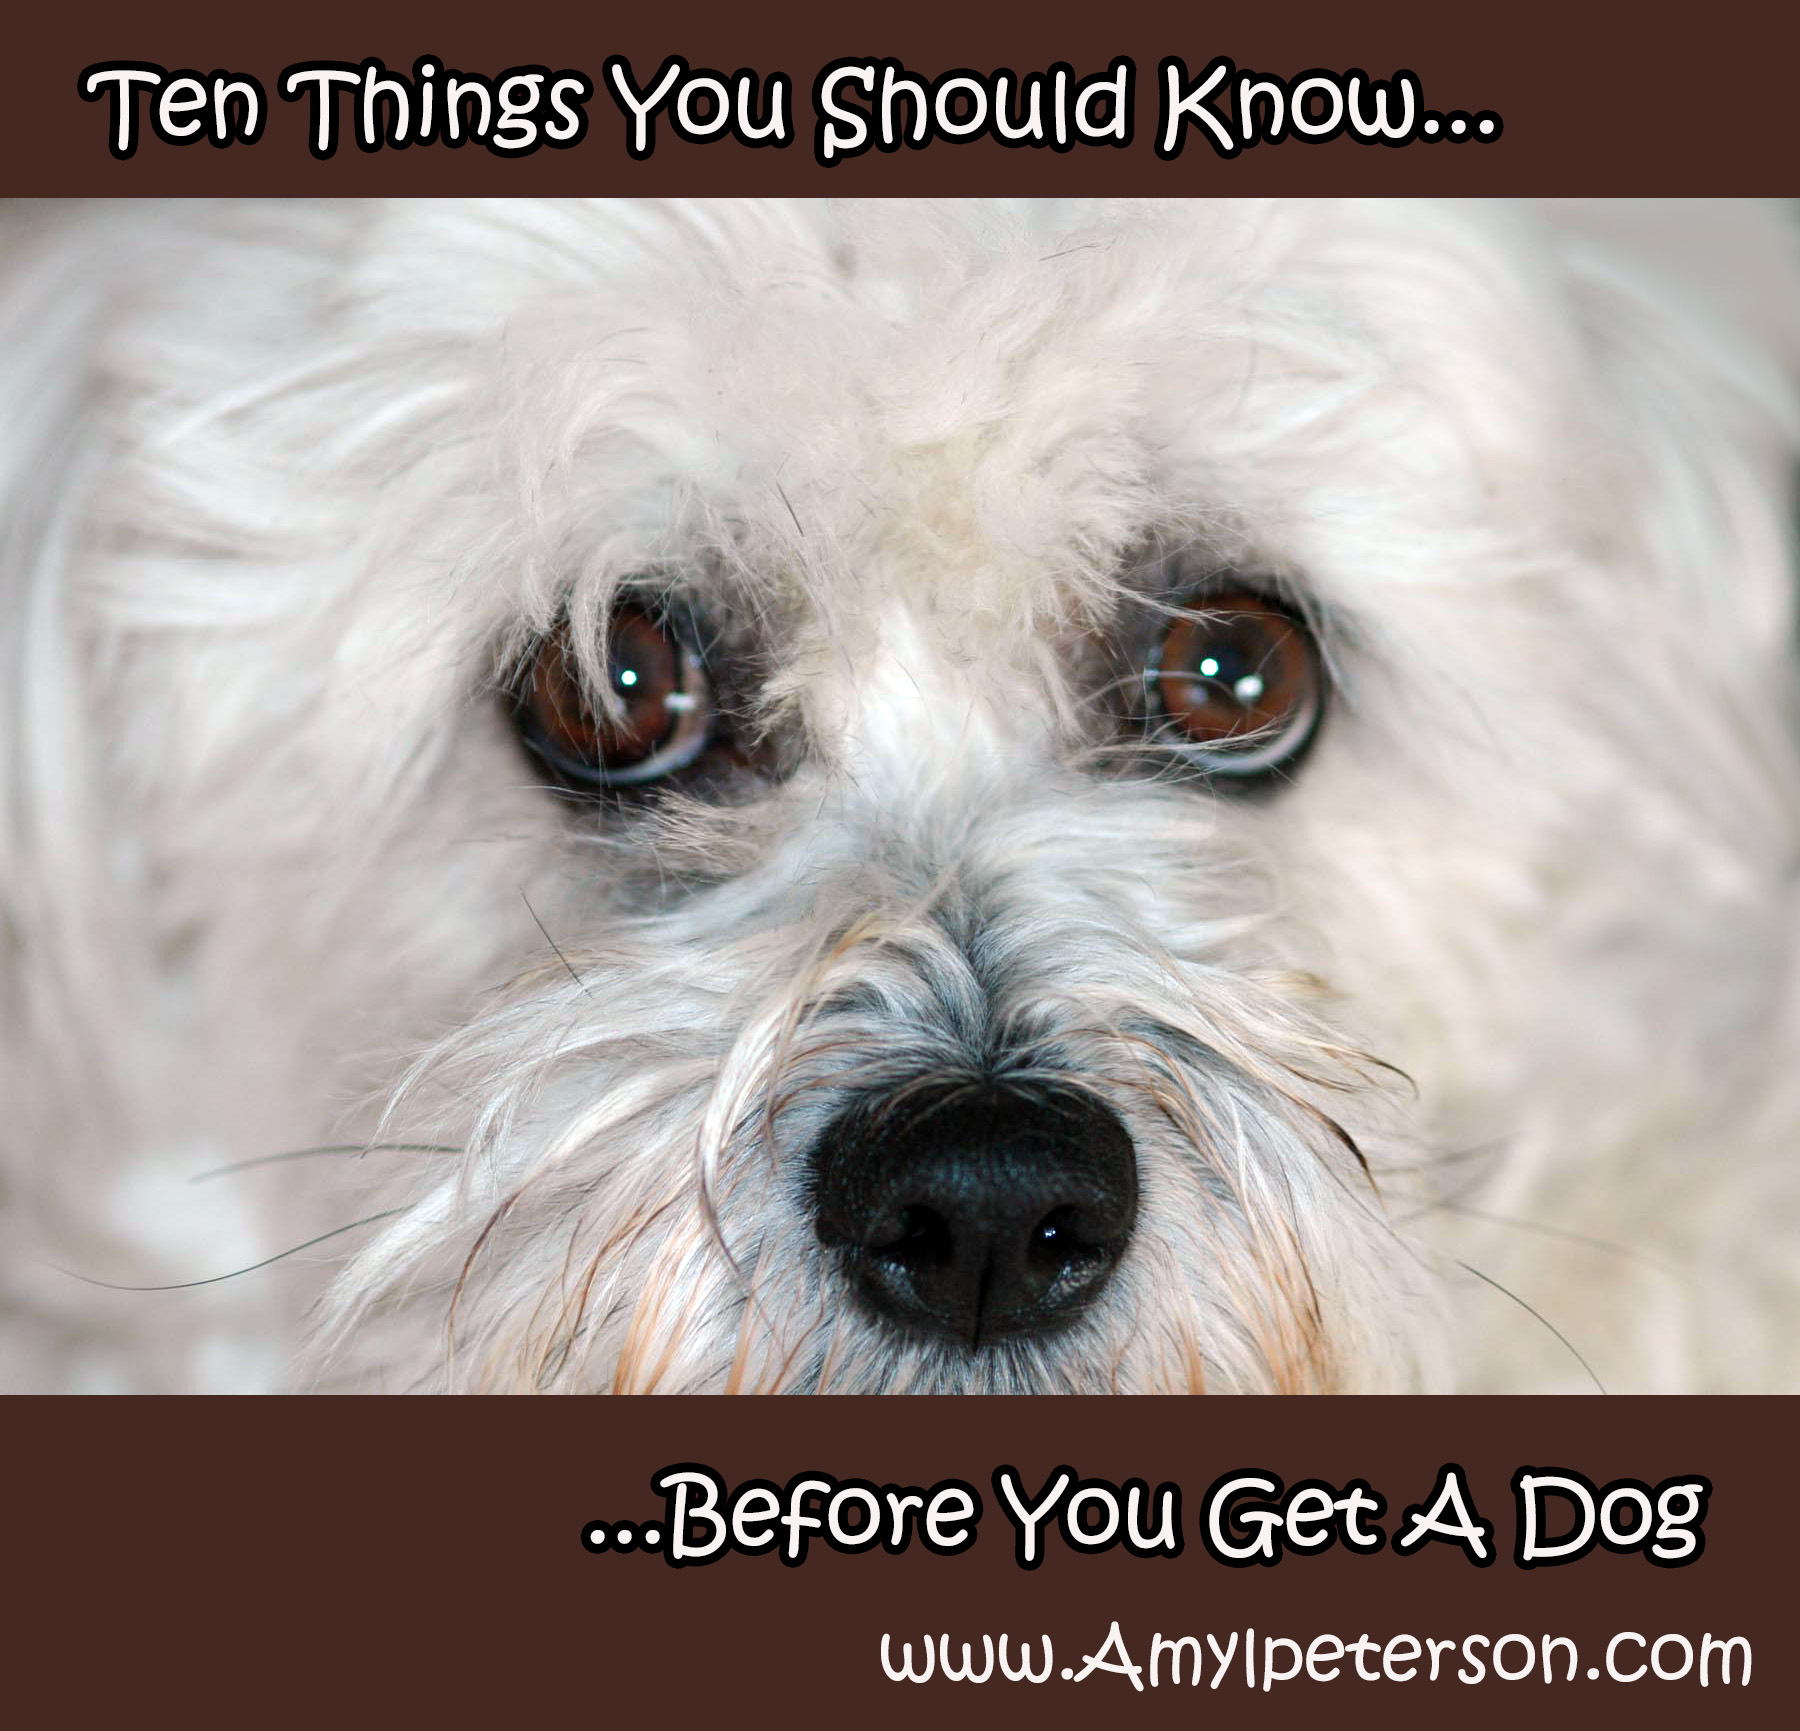 Ten Things You Should Know Before You Get a Dog - Amy L Peterson